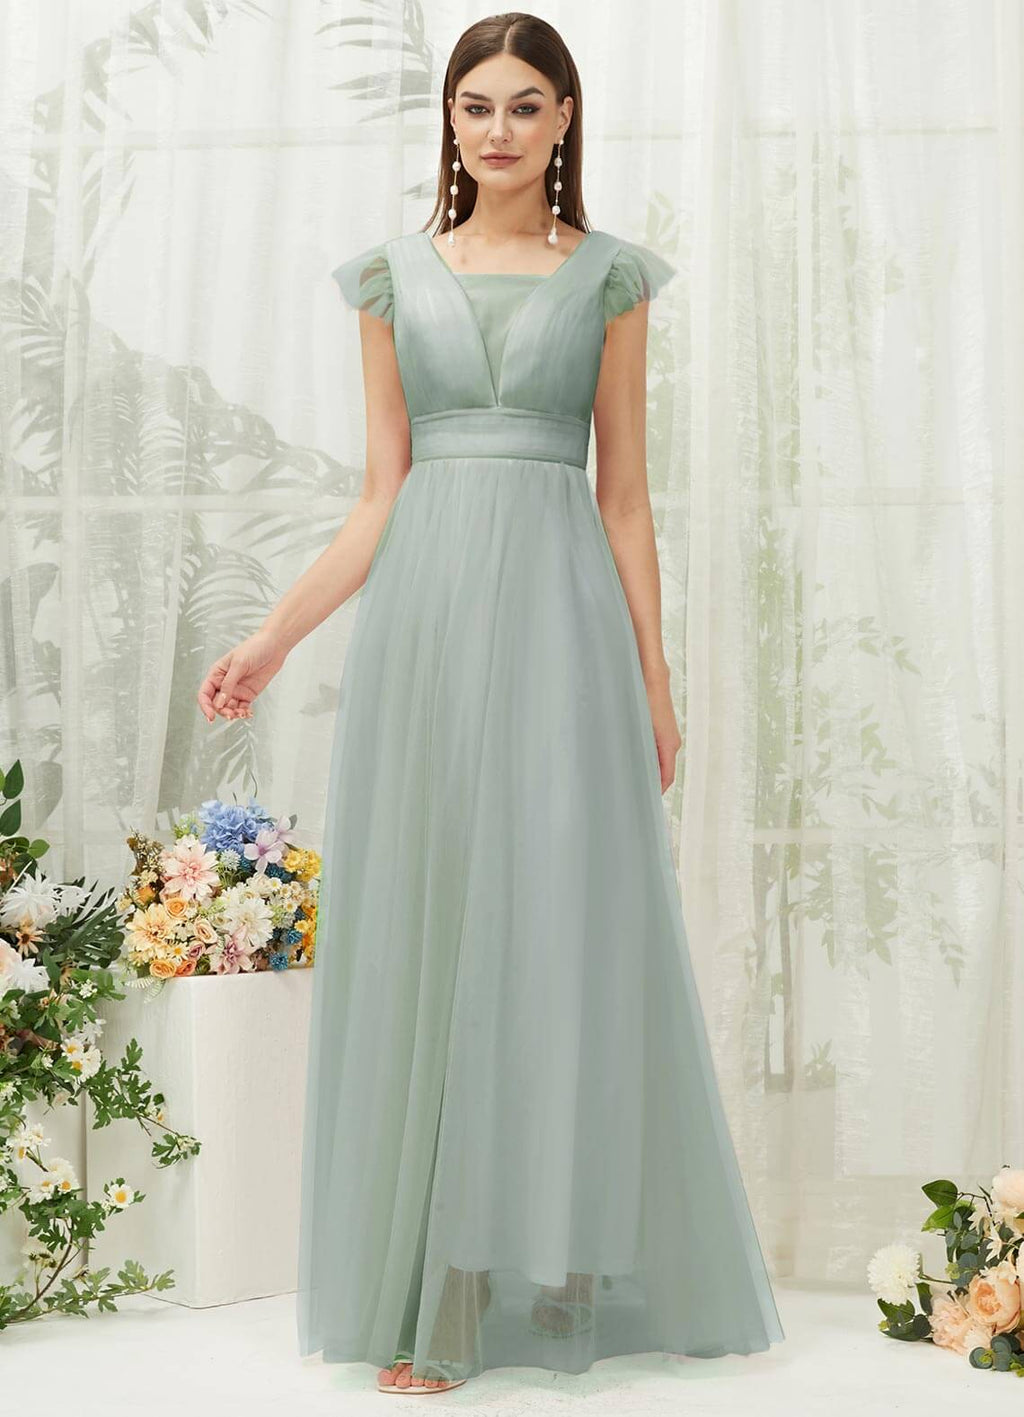 NZ Bridal Tulle Maxi Backless Sage Green  bridesmaid dresses R0410 Collins a